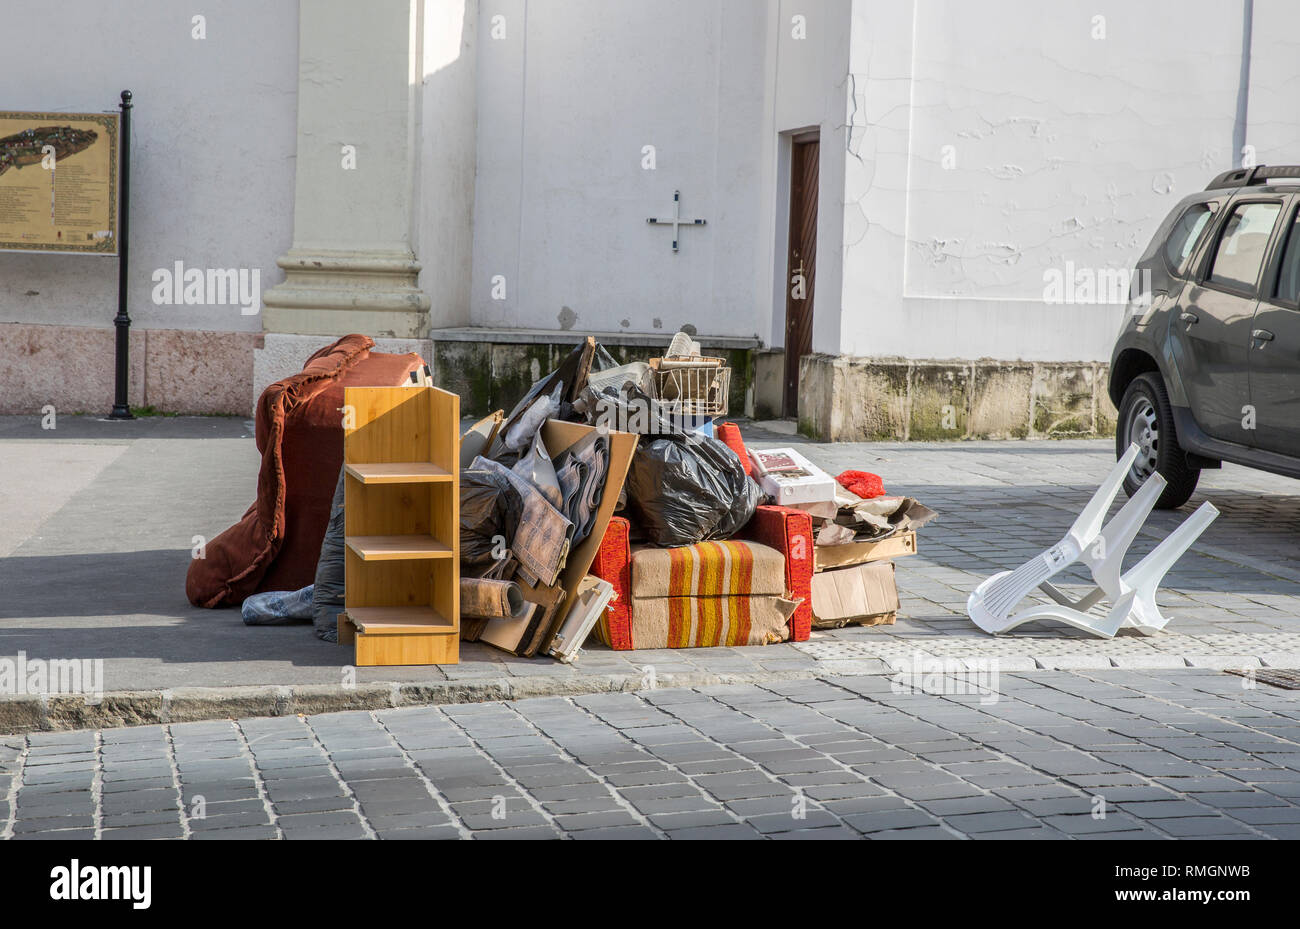 Bulky Waste On The Street Broken Beds Chairs Garbage Furniture